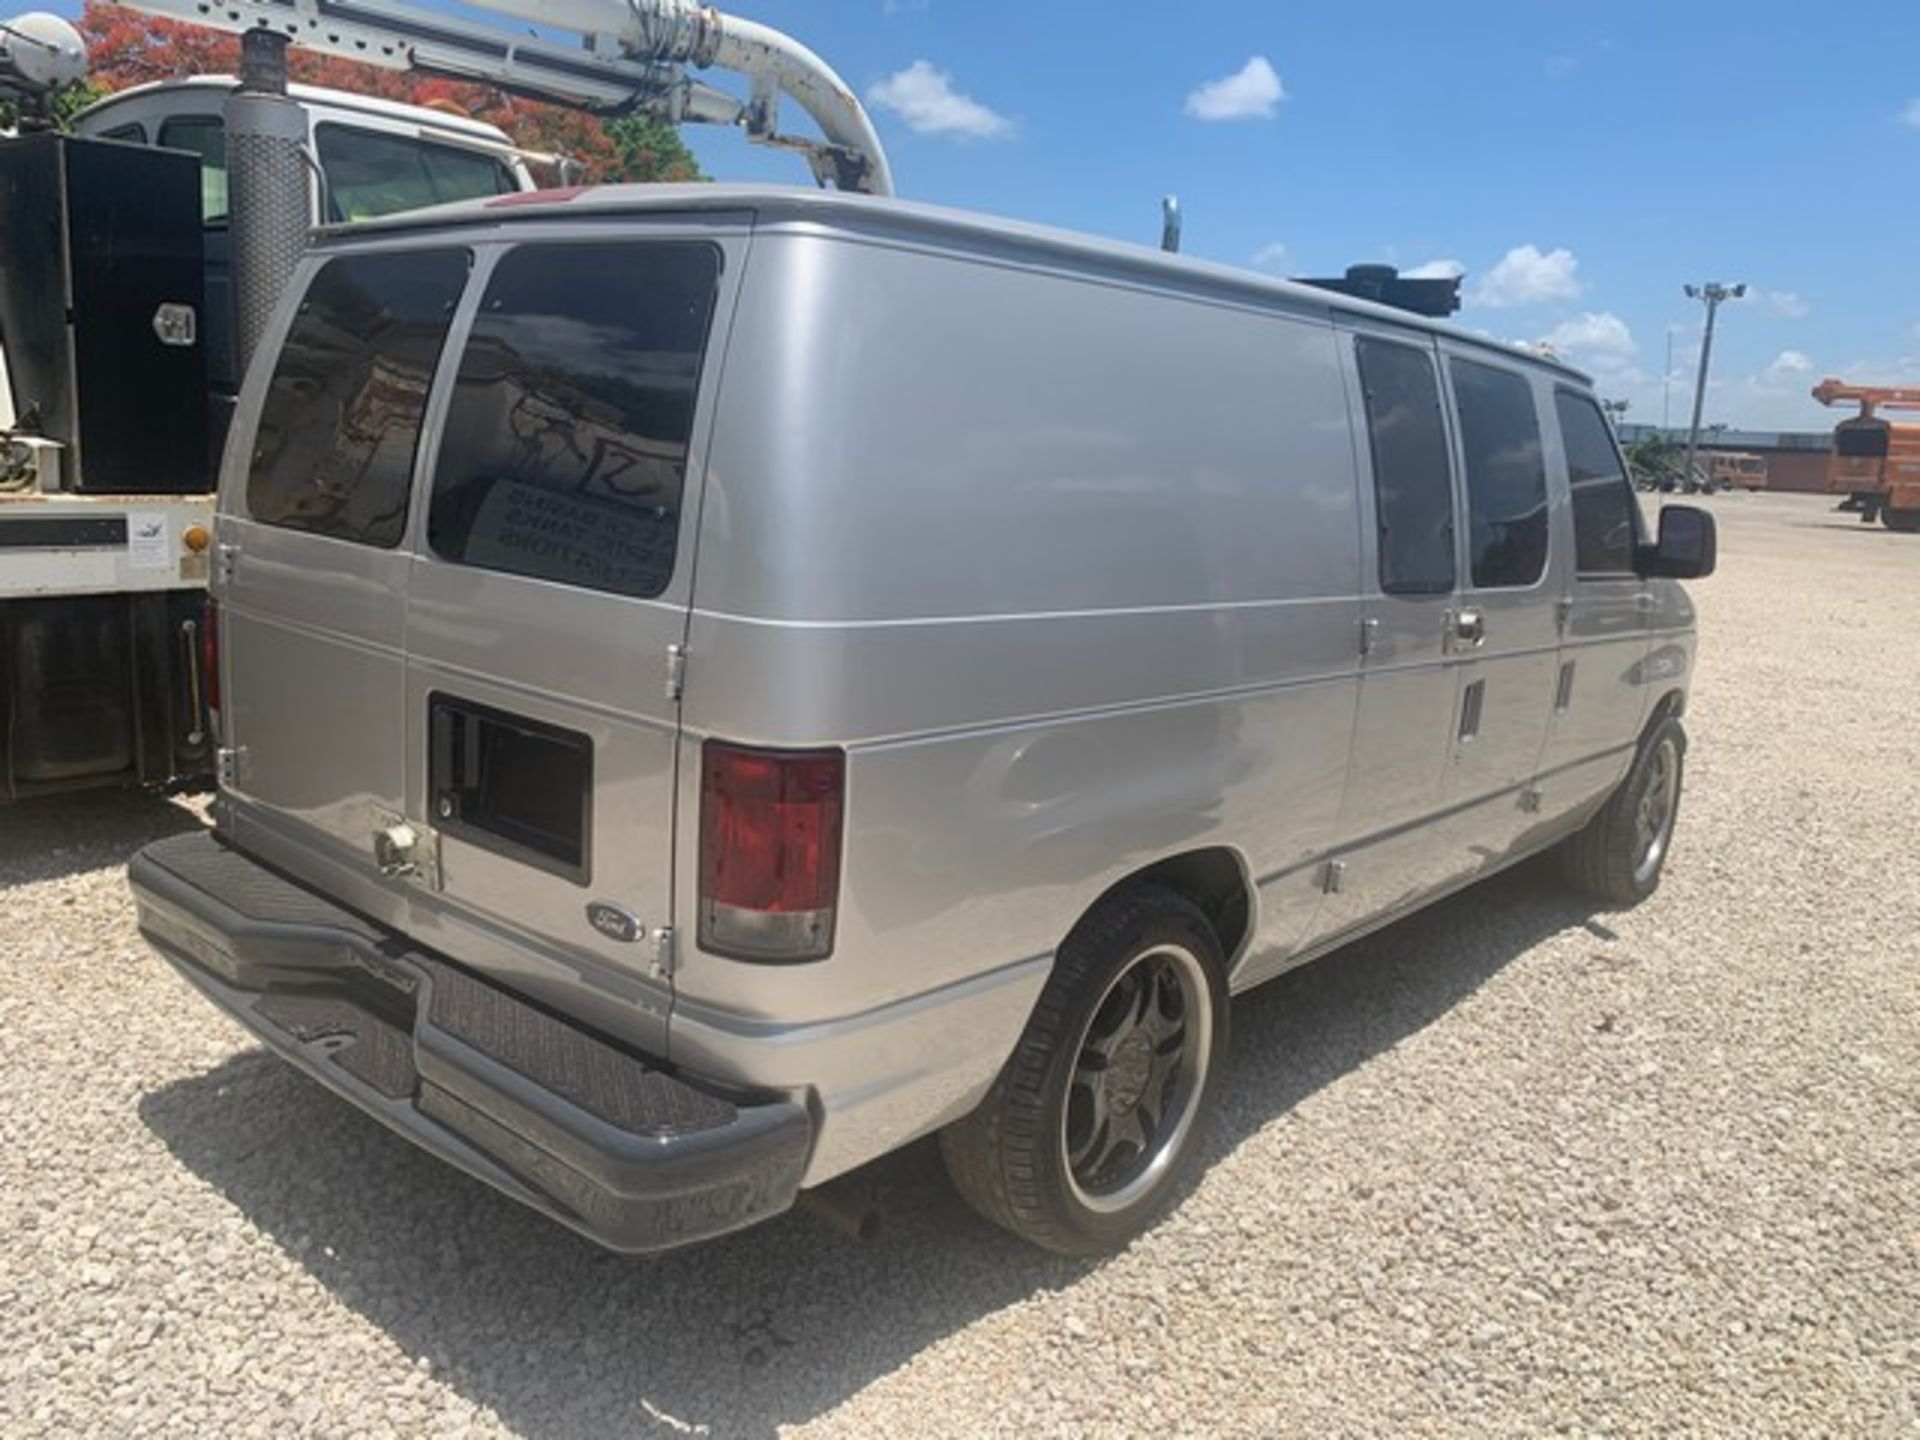 2005 FORD ECONOLINE VAN - VIN #1FTRE14W75HB02370 - SILVER - VINYL INTERIOR - TOW PACKAGE - CUSTOM WH - Image 5 of 12